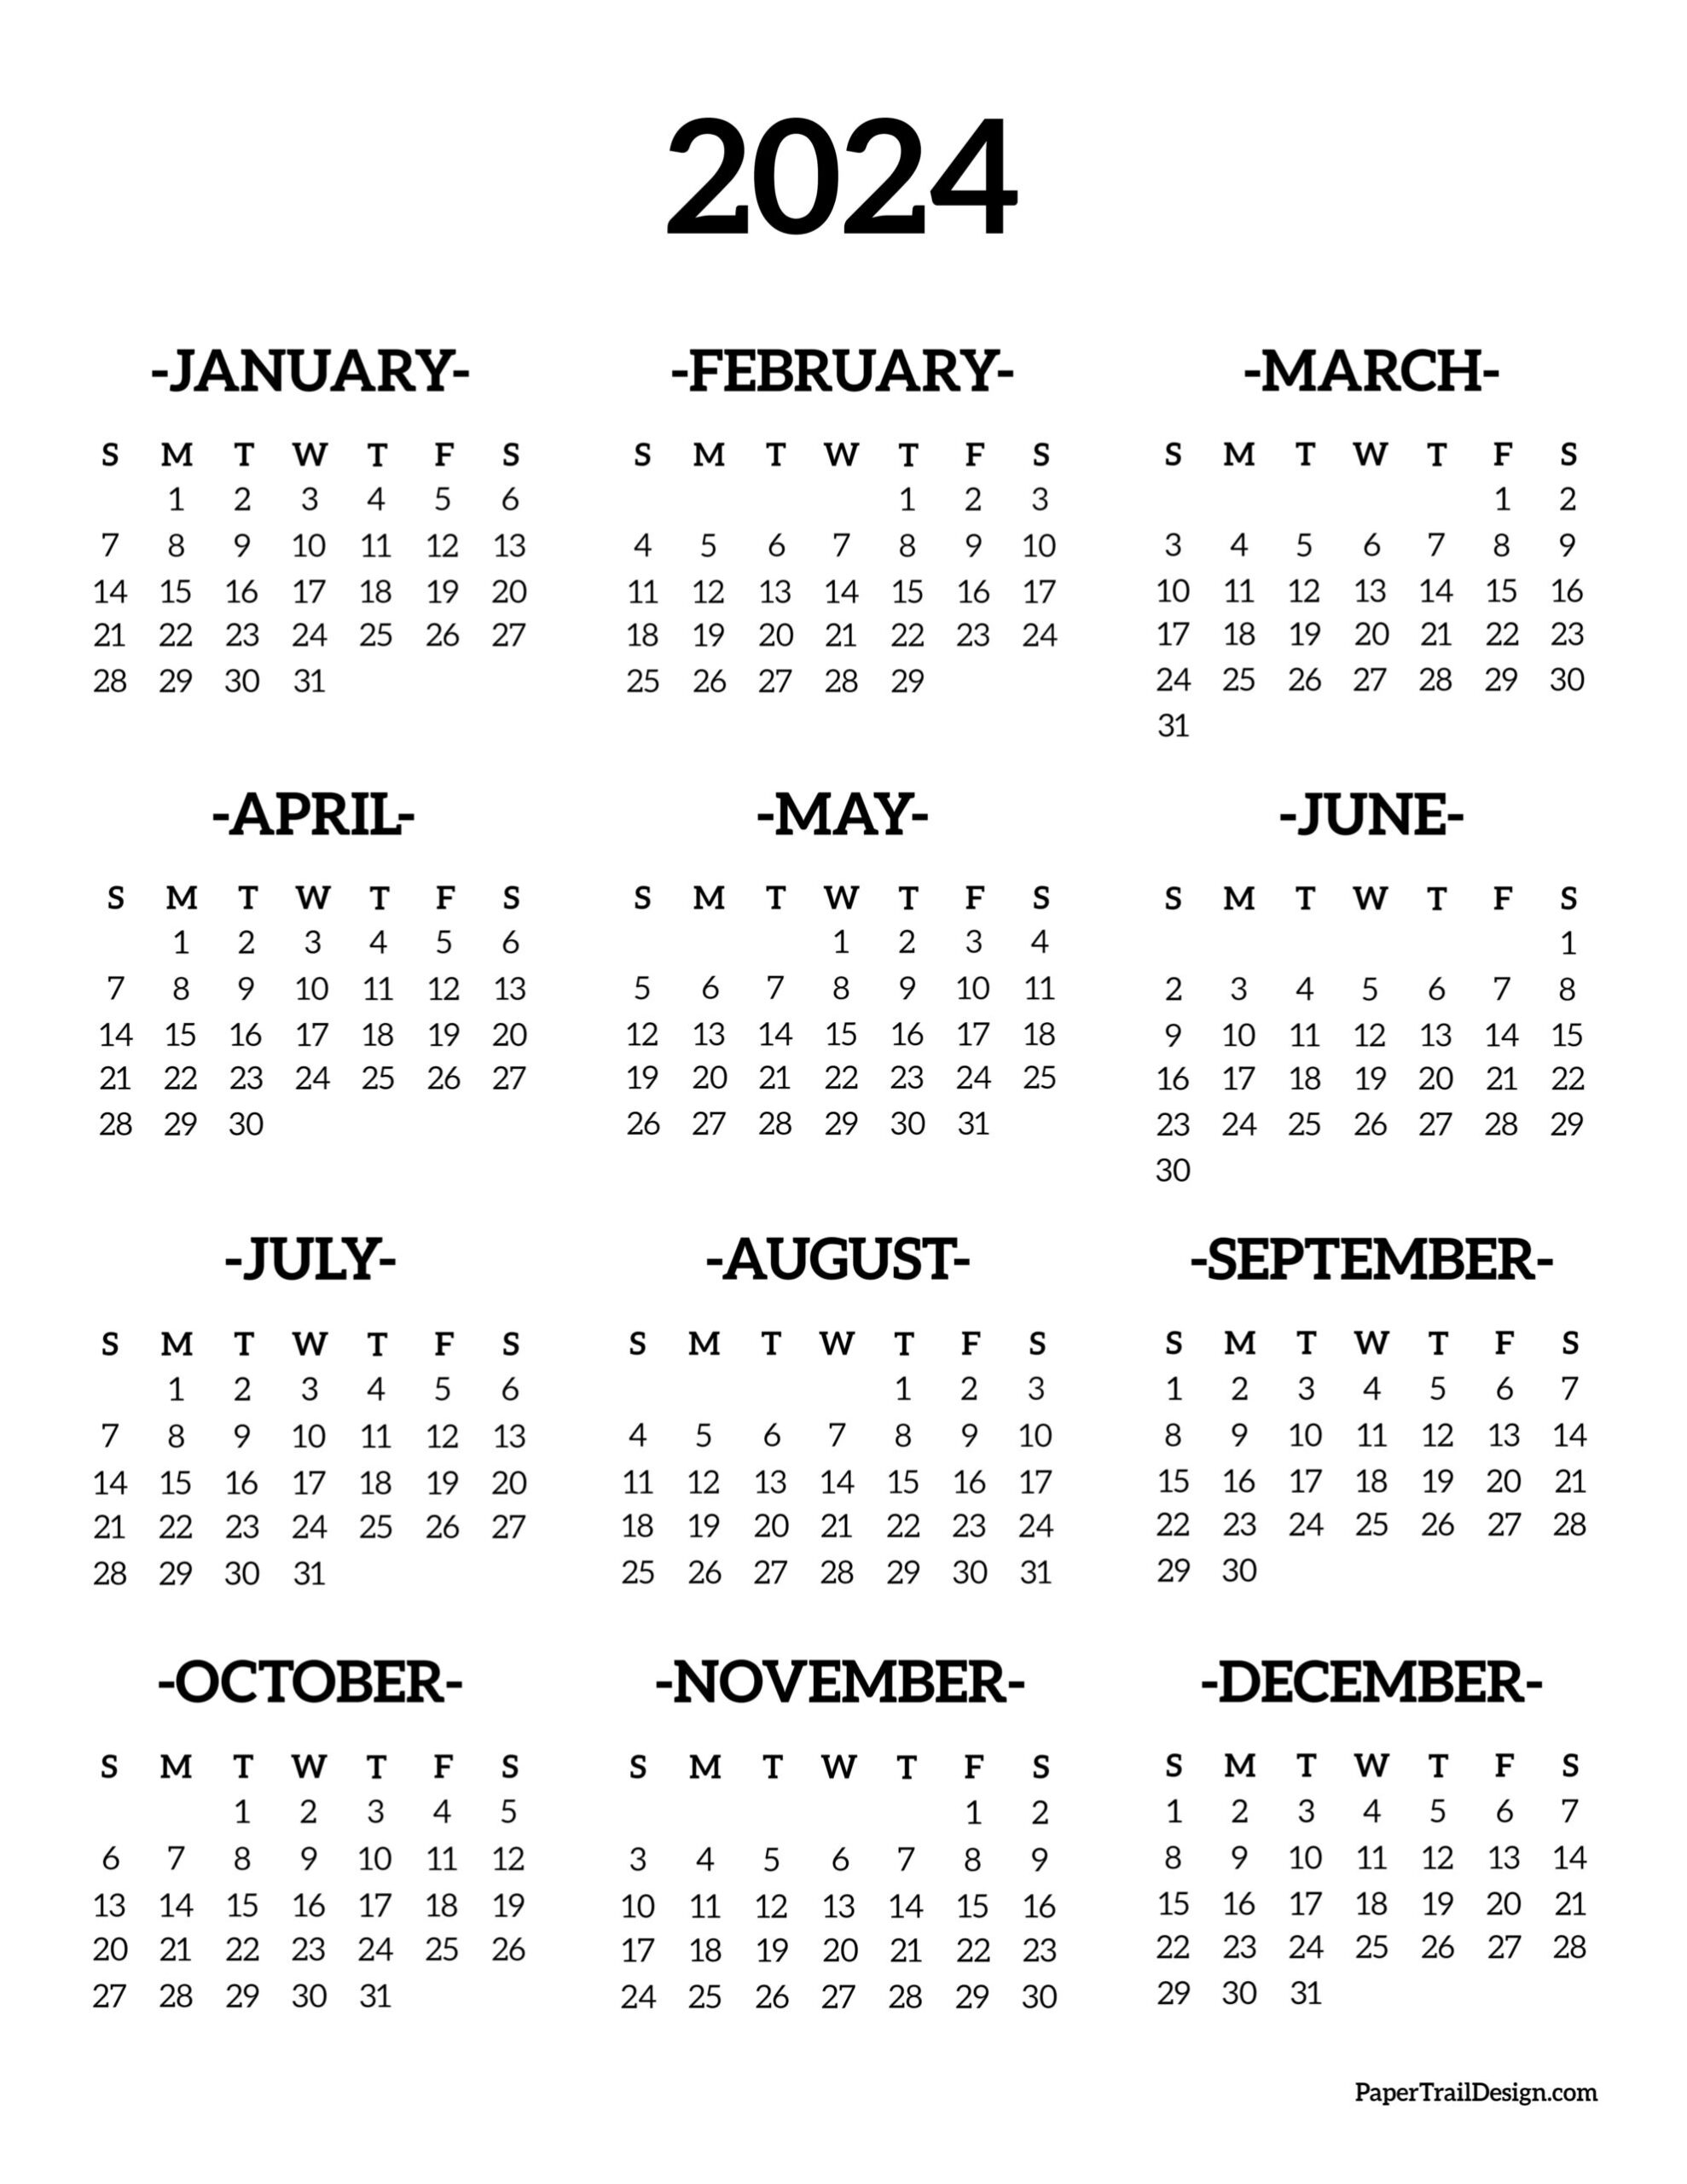 2024 Yearly Downloadable Free Printable 2024 Calendar With Holidays - Free Printable 2024 Calendar Year At A Glance